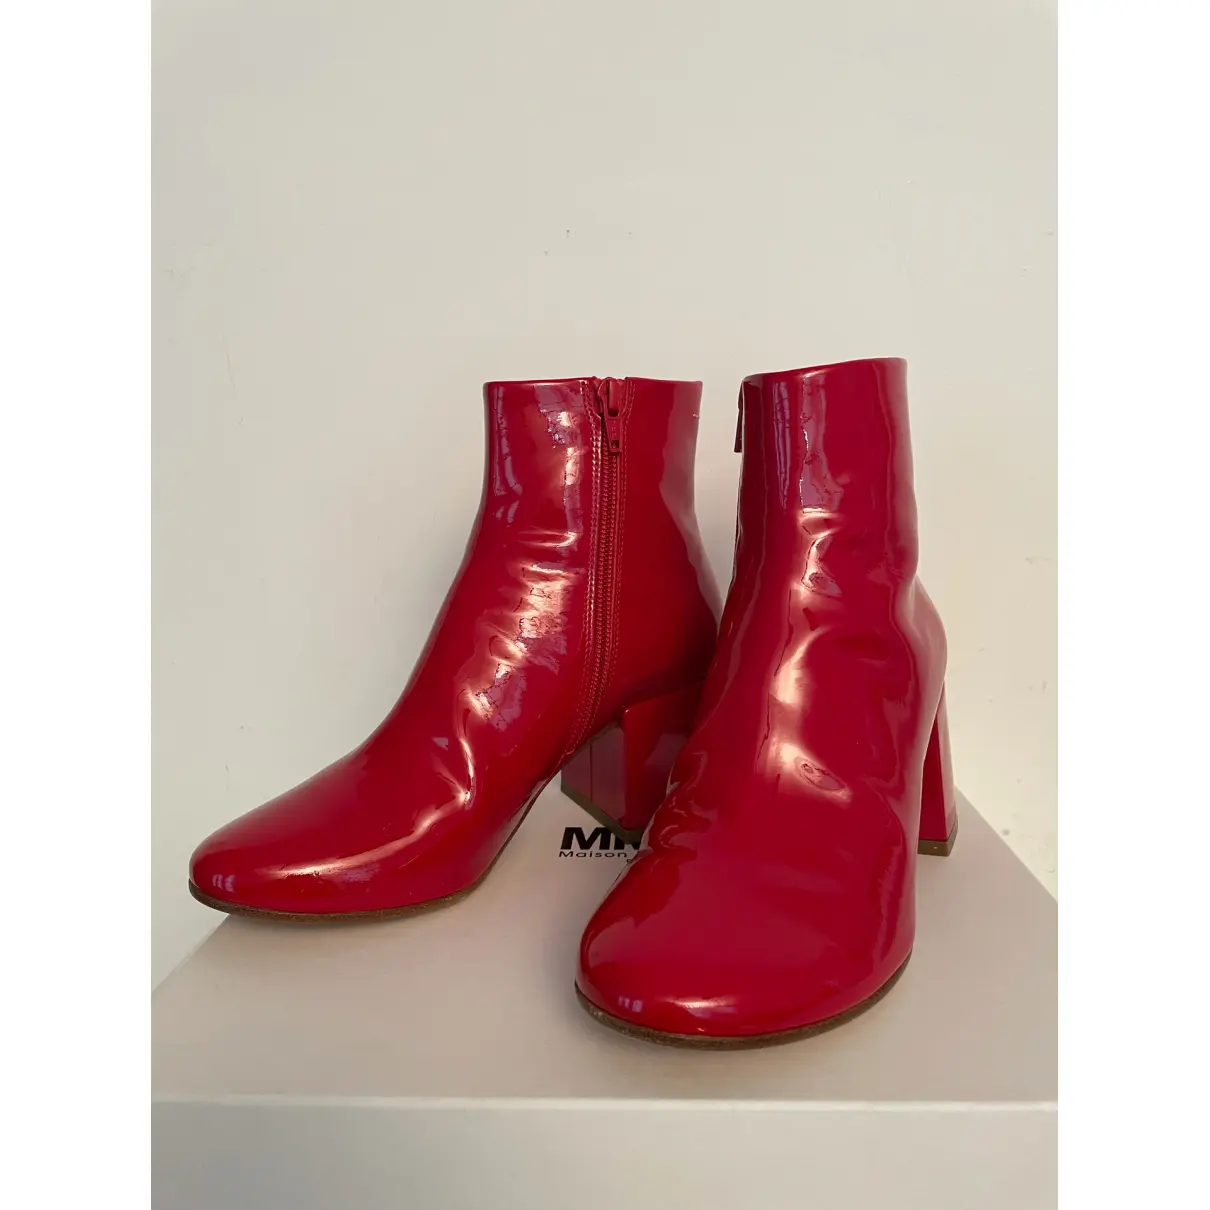 Buy MM6 Patent leather ankle boots online